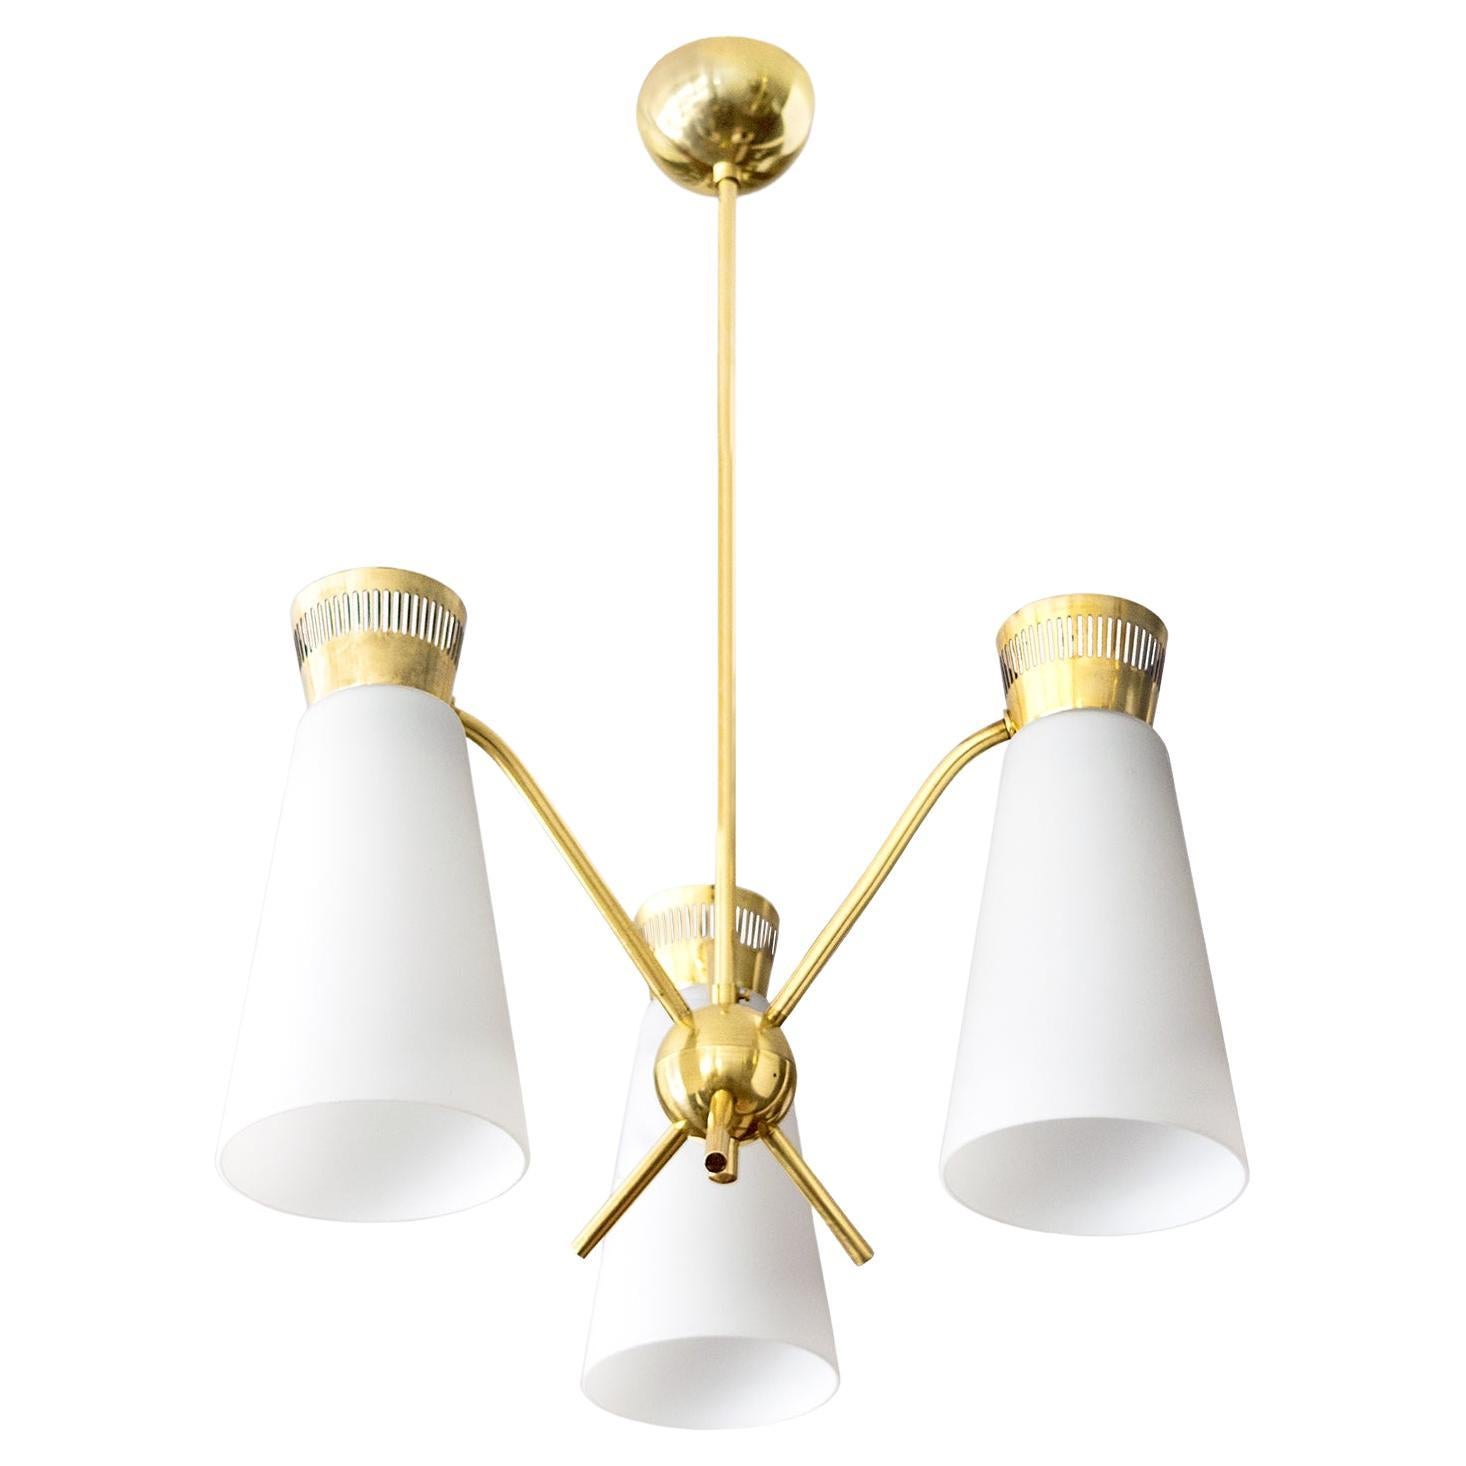 Itsu Finish Pendant with Three Opal Glass Shades on a Brass Frame